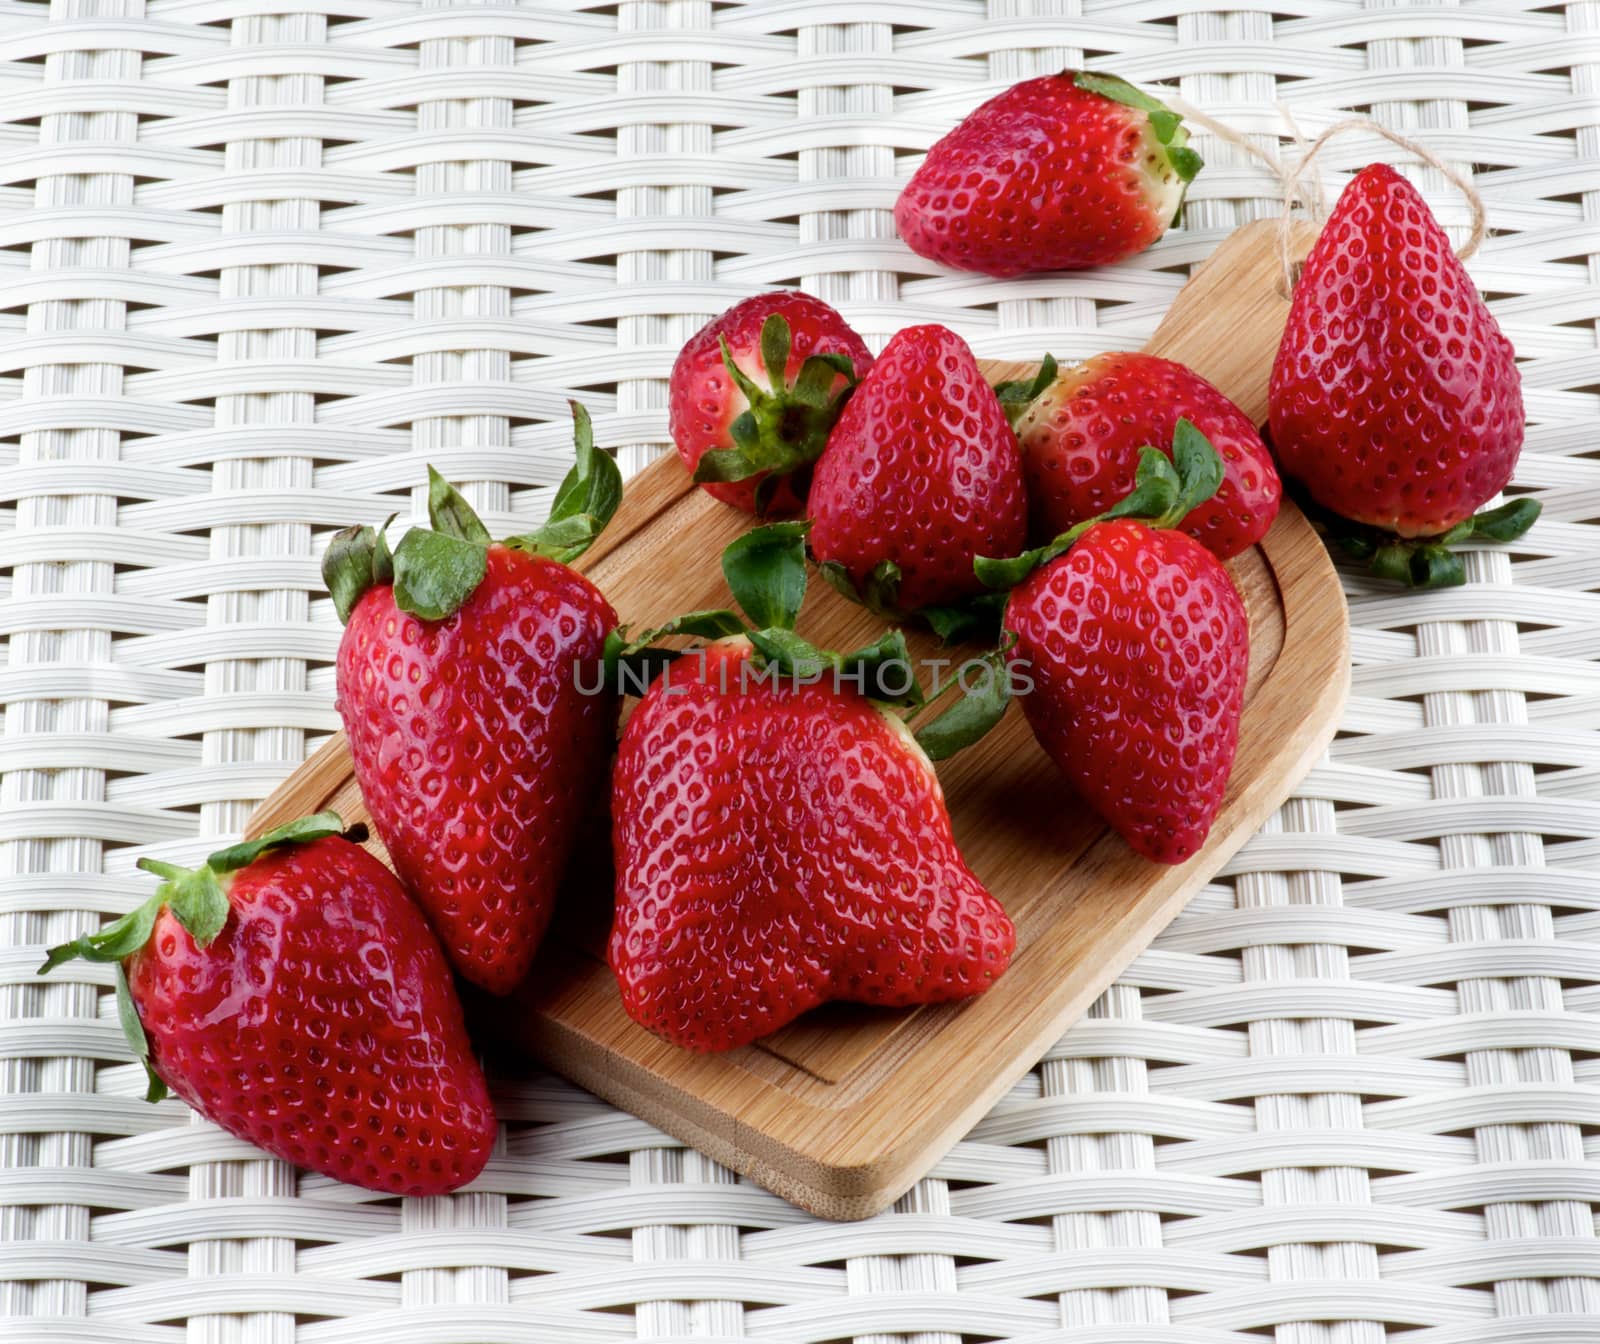 Heap of Fresh Ripe Strawberries on Small Wooden Cutting Board closeup on Wicker background